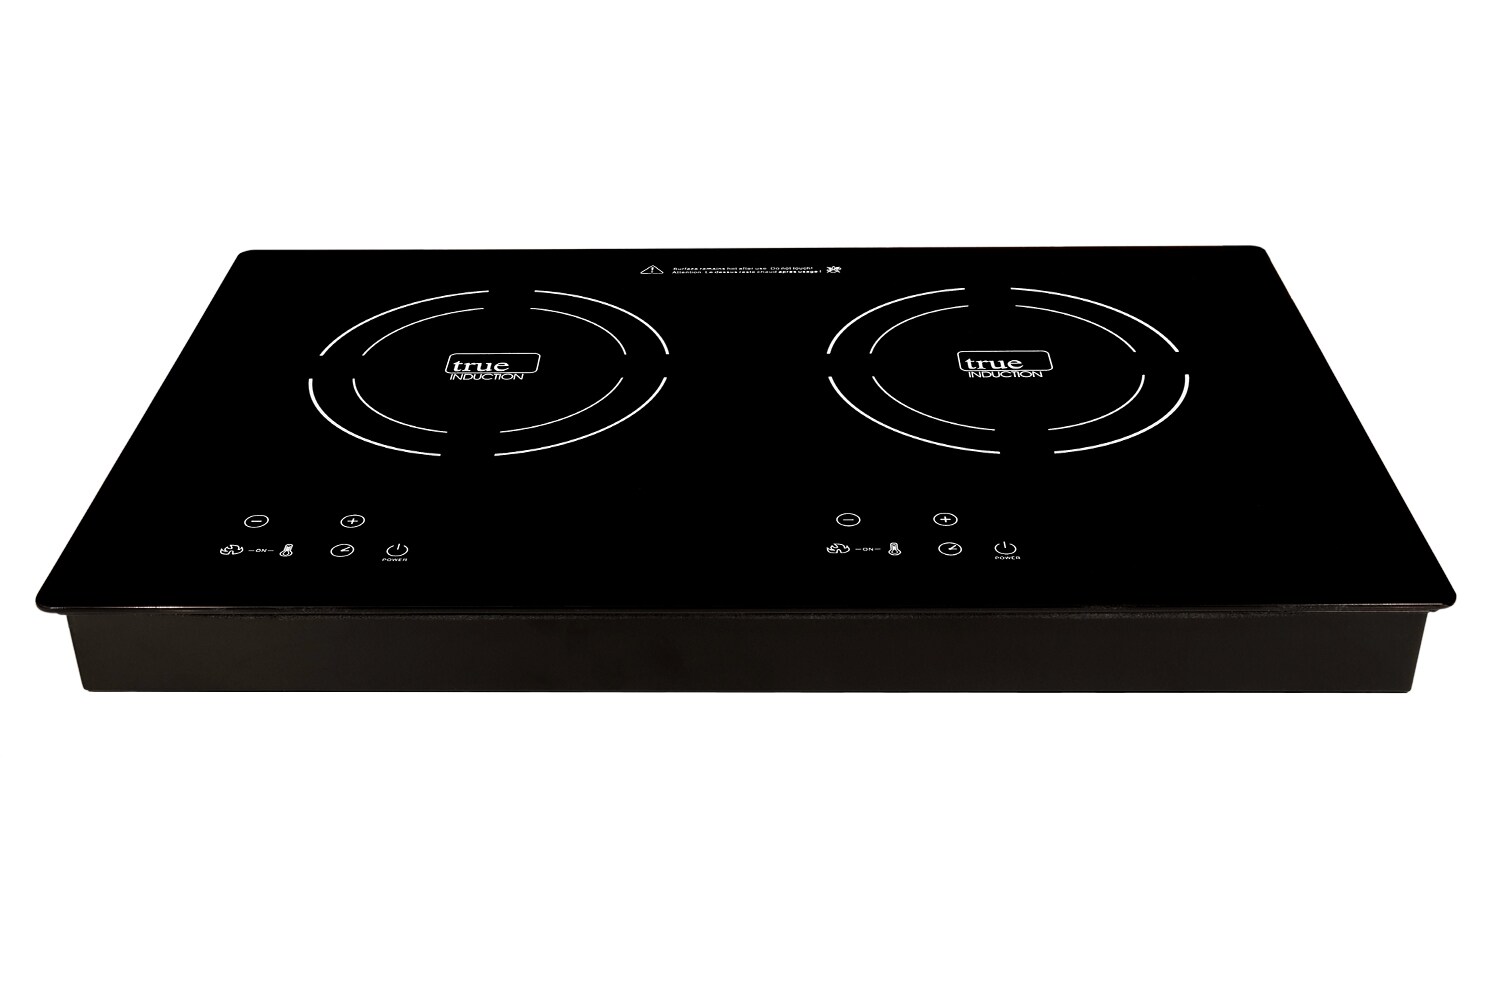 2 elements Induction Cooktops at